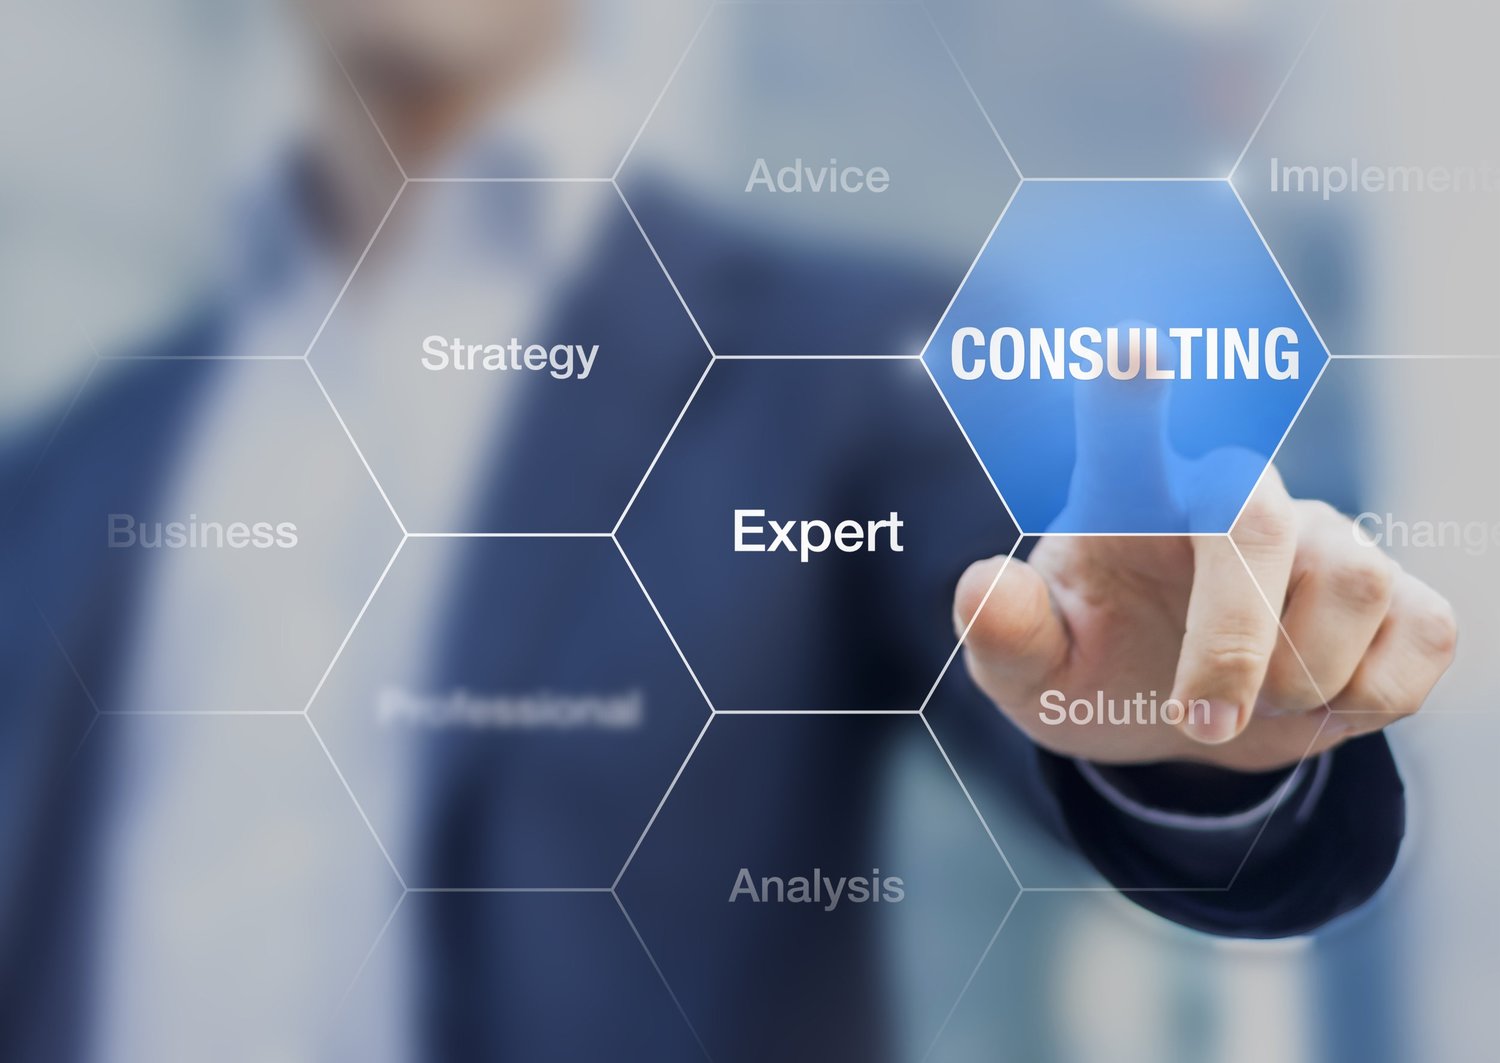 Monticello Consulting Group